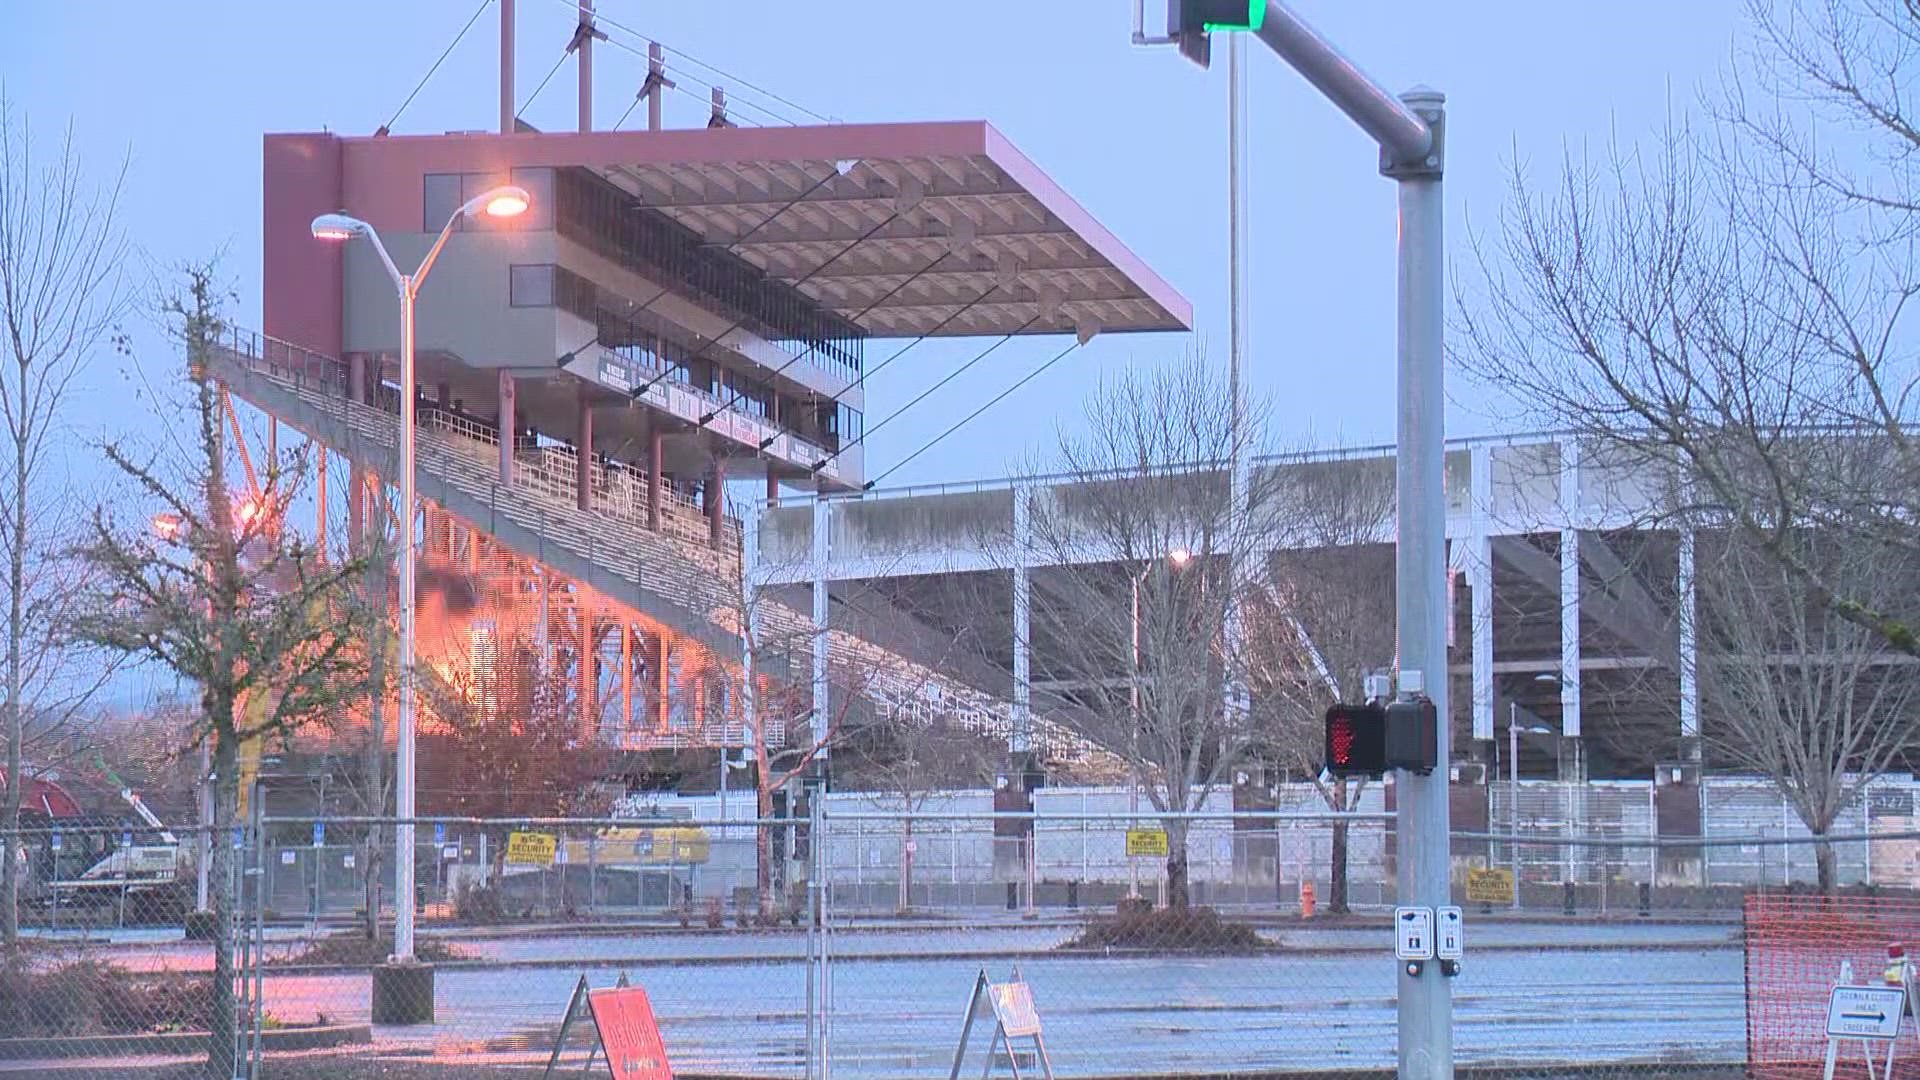 The west side of the Beavers' football stadium in Corvallis, Ore. was imploded Friday morning, Jan. 7, 2022, as part of a $153 million renovation project.